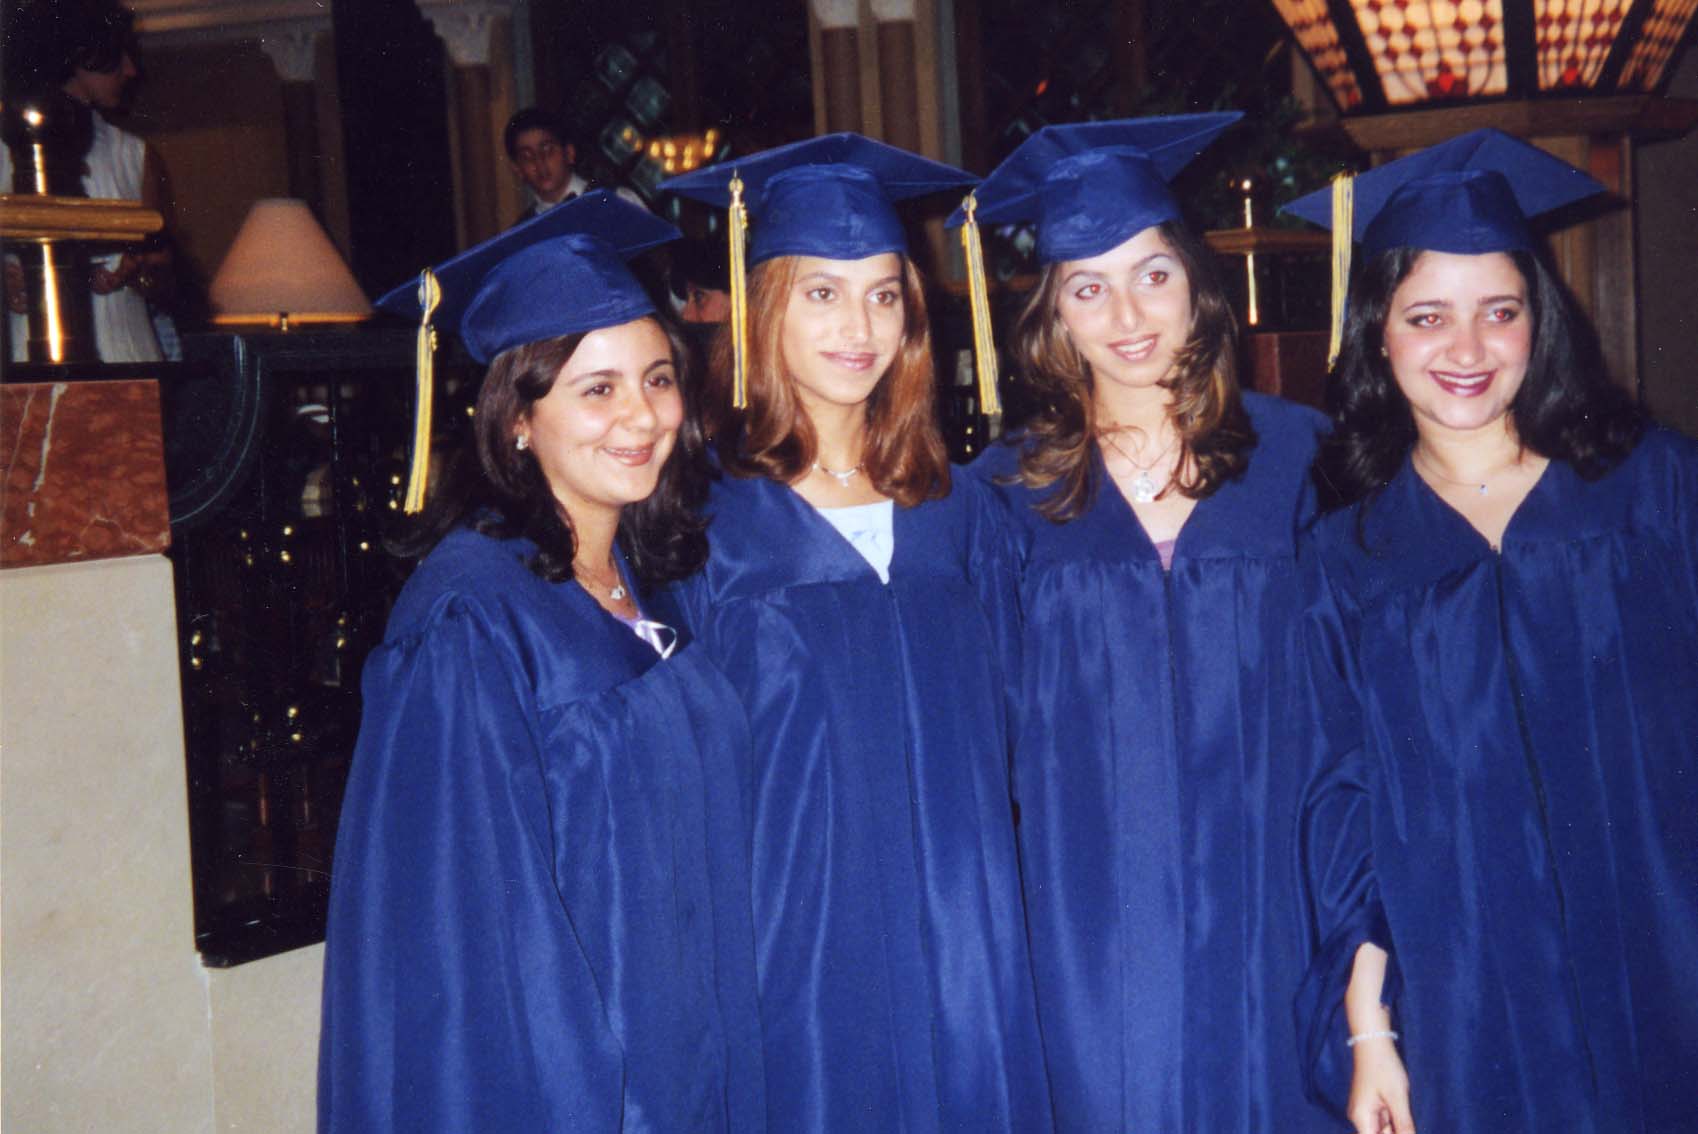 My graduation at the Royal Meridian in Manama, Bahrain(Class of 2000)